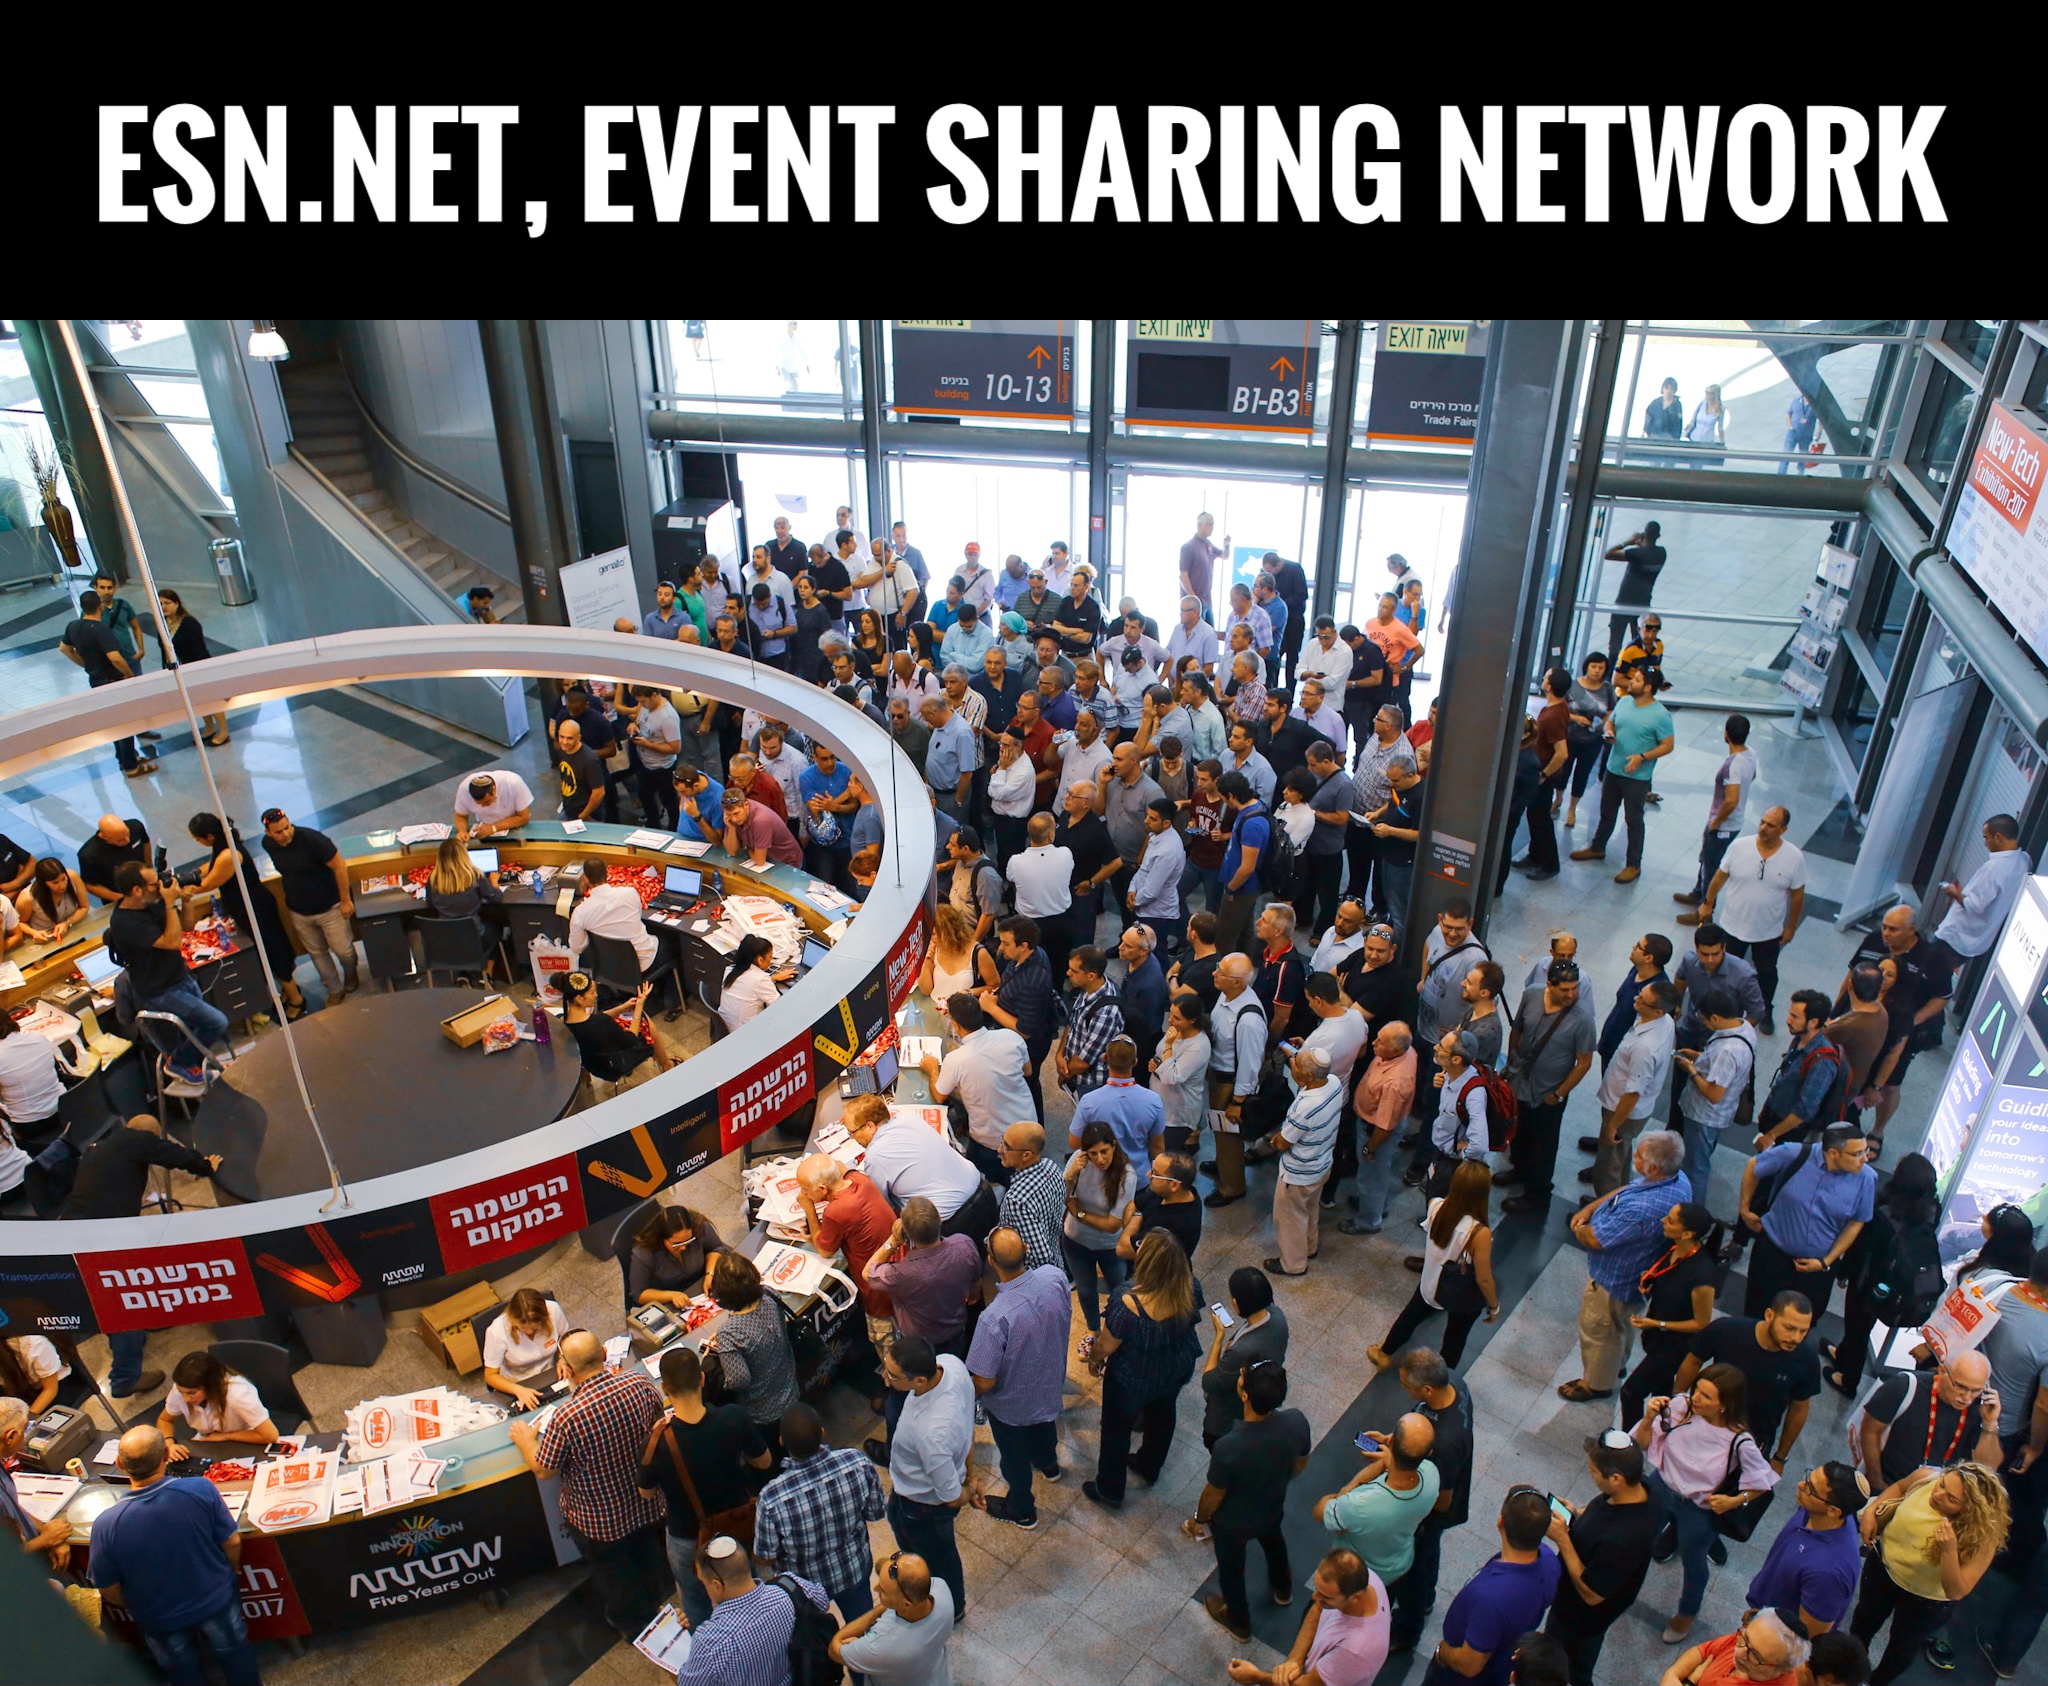 ESN.net, event sharing network, domain name for sale